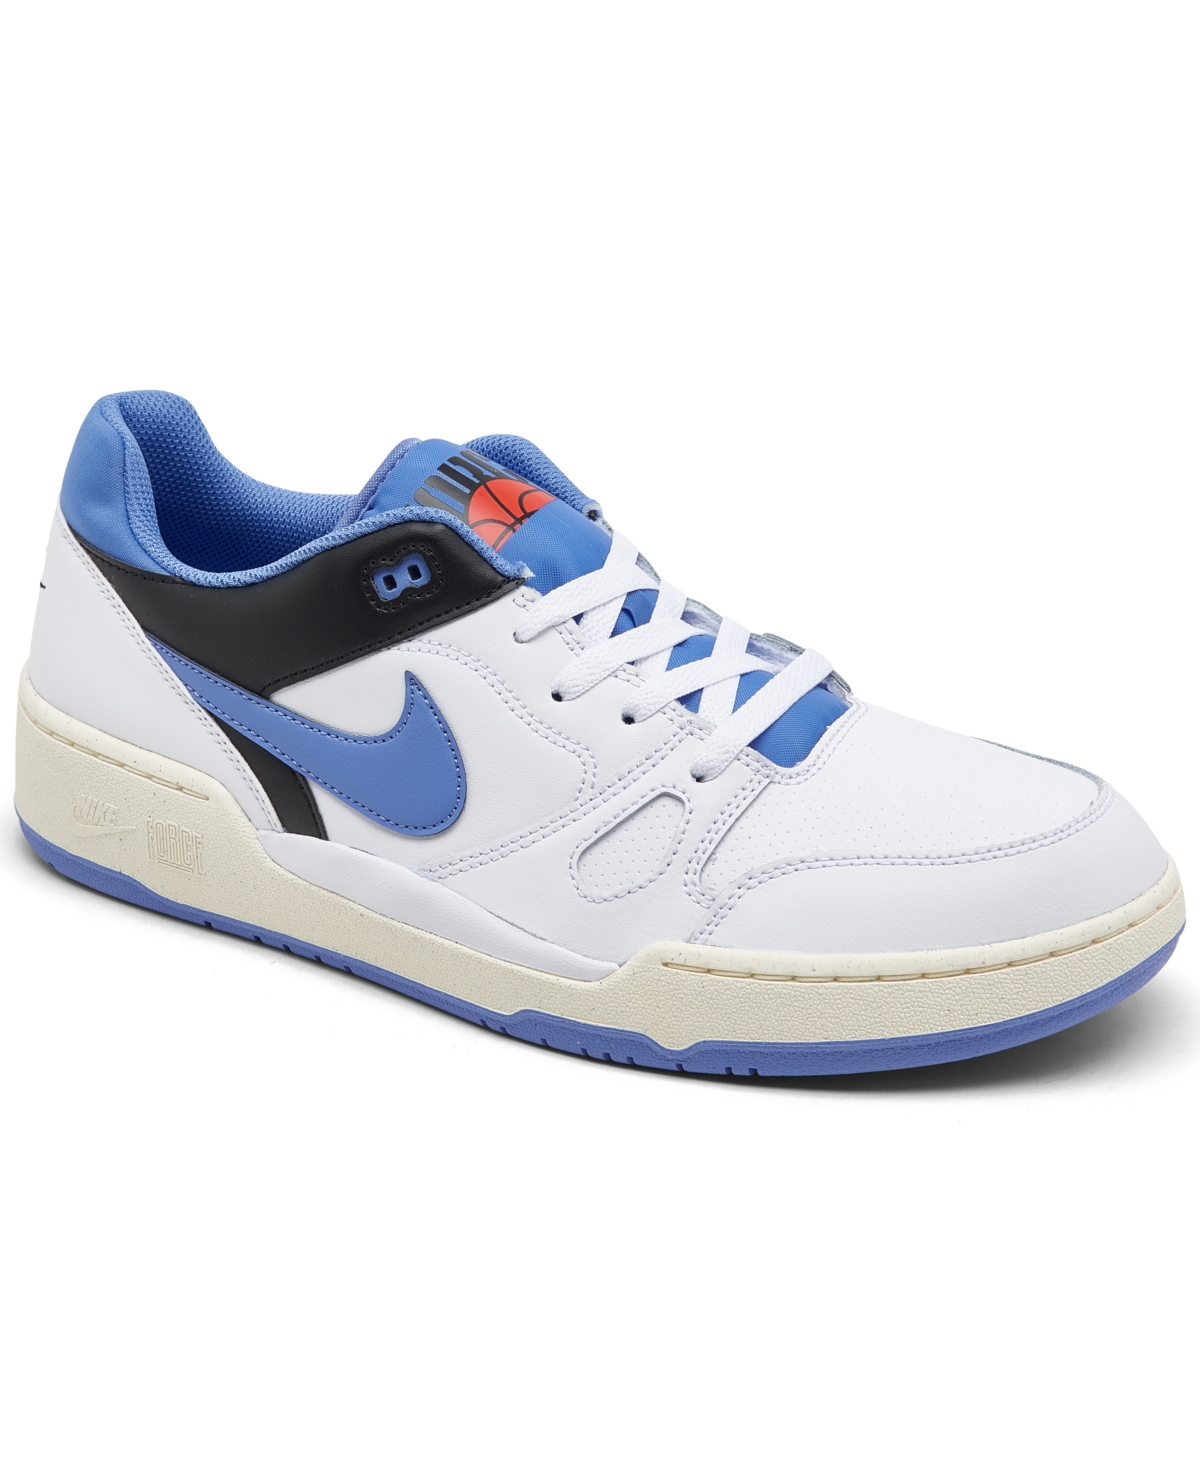 Men's Full Force Low Casual Sneakers from Finish Line - White/polar